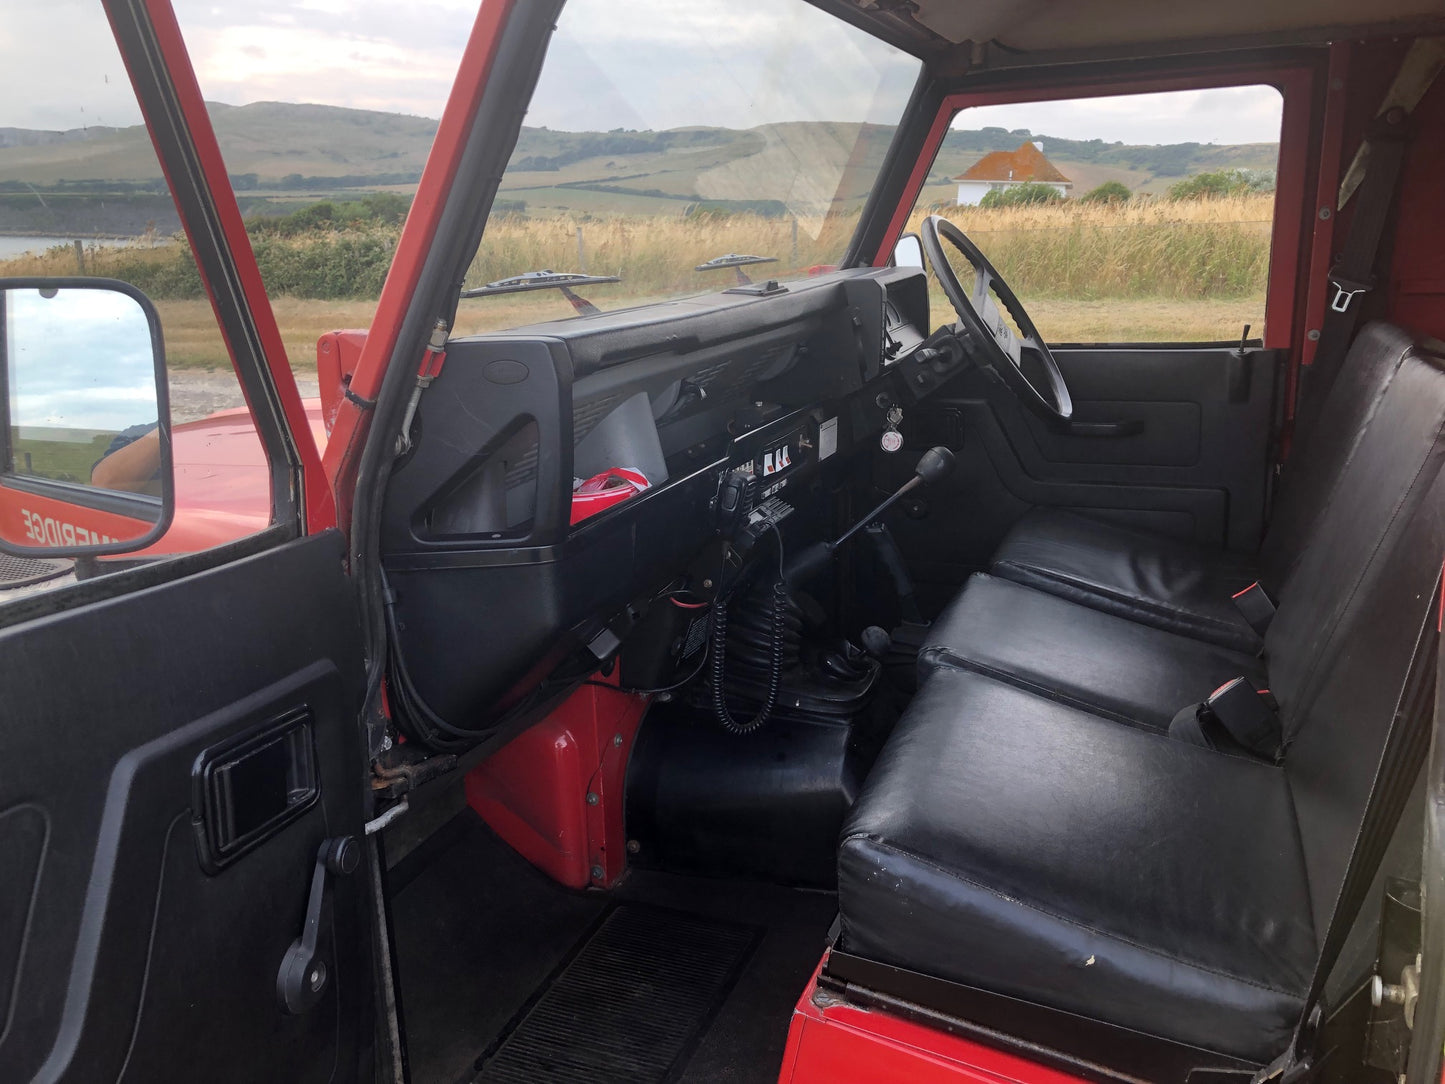 SOLD Land Rover 110 V8 Fire Engine by Excalibur